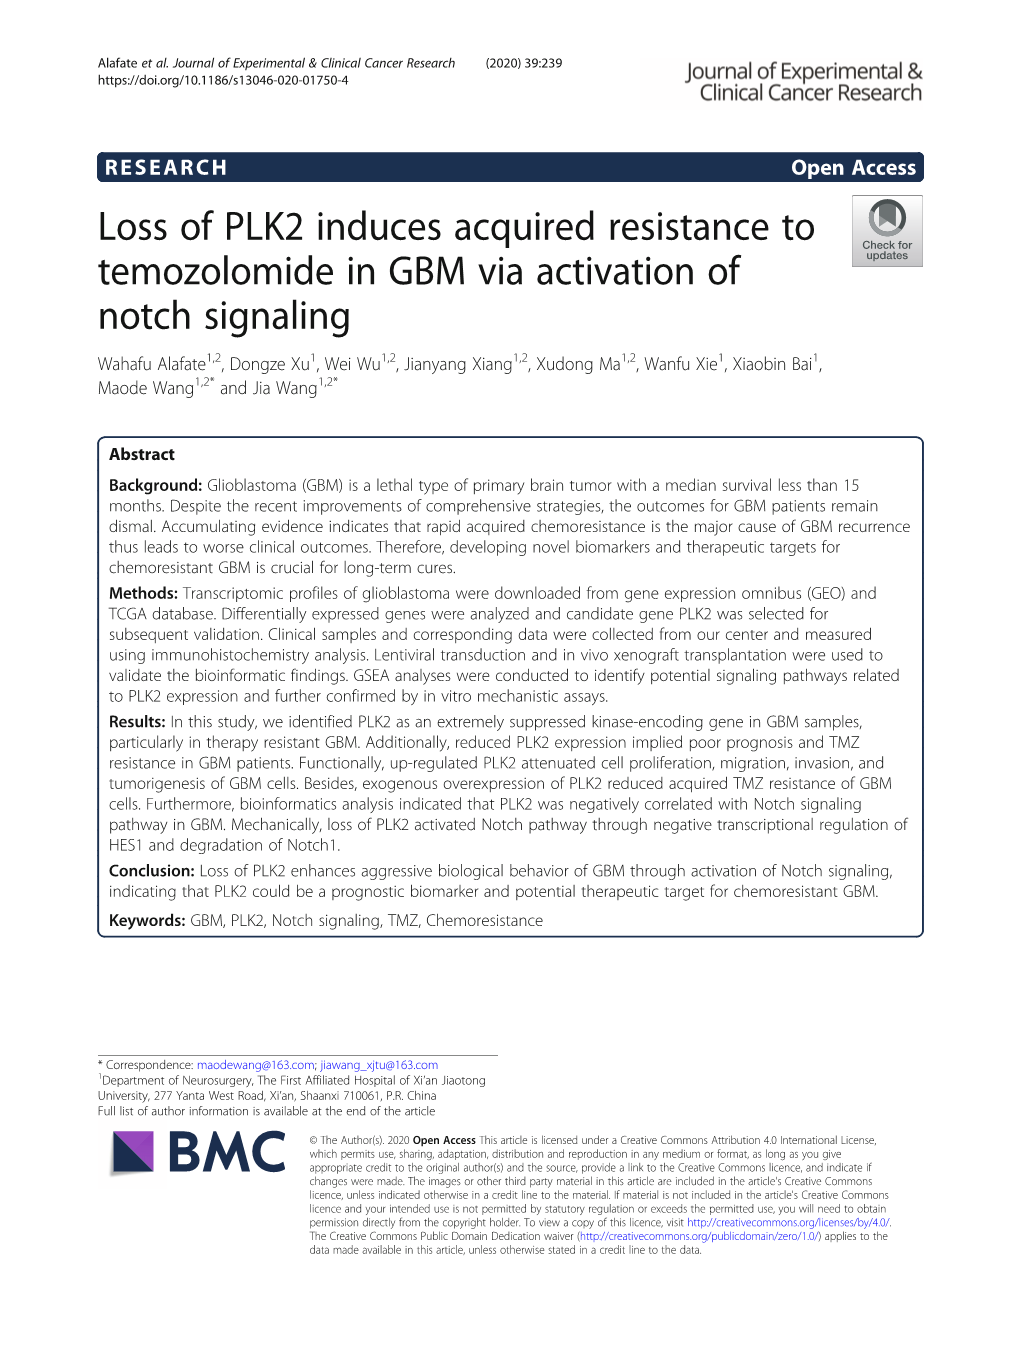 Loss of PLK2 Induces Acquired Resistance to Temozolomide in GBM